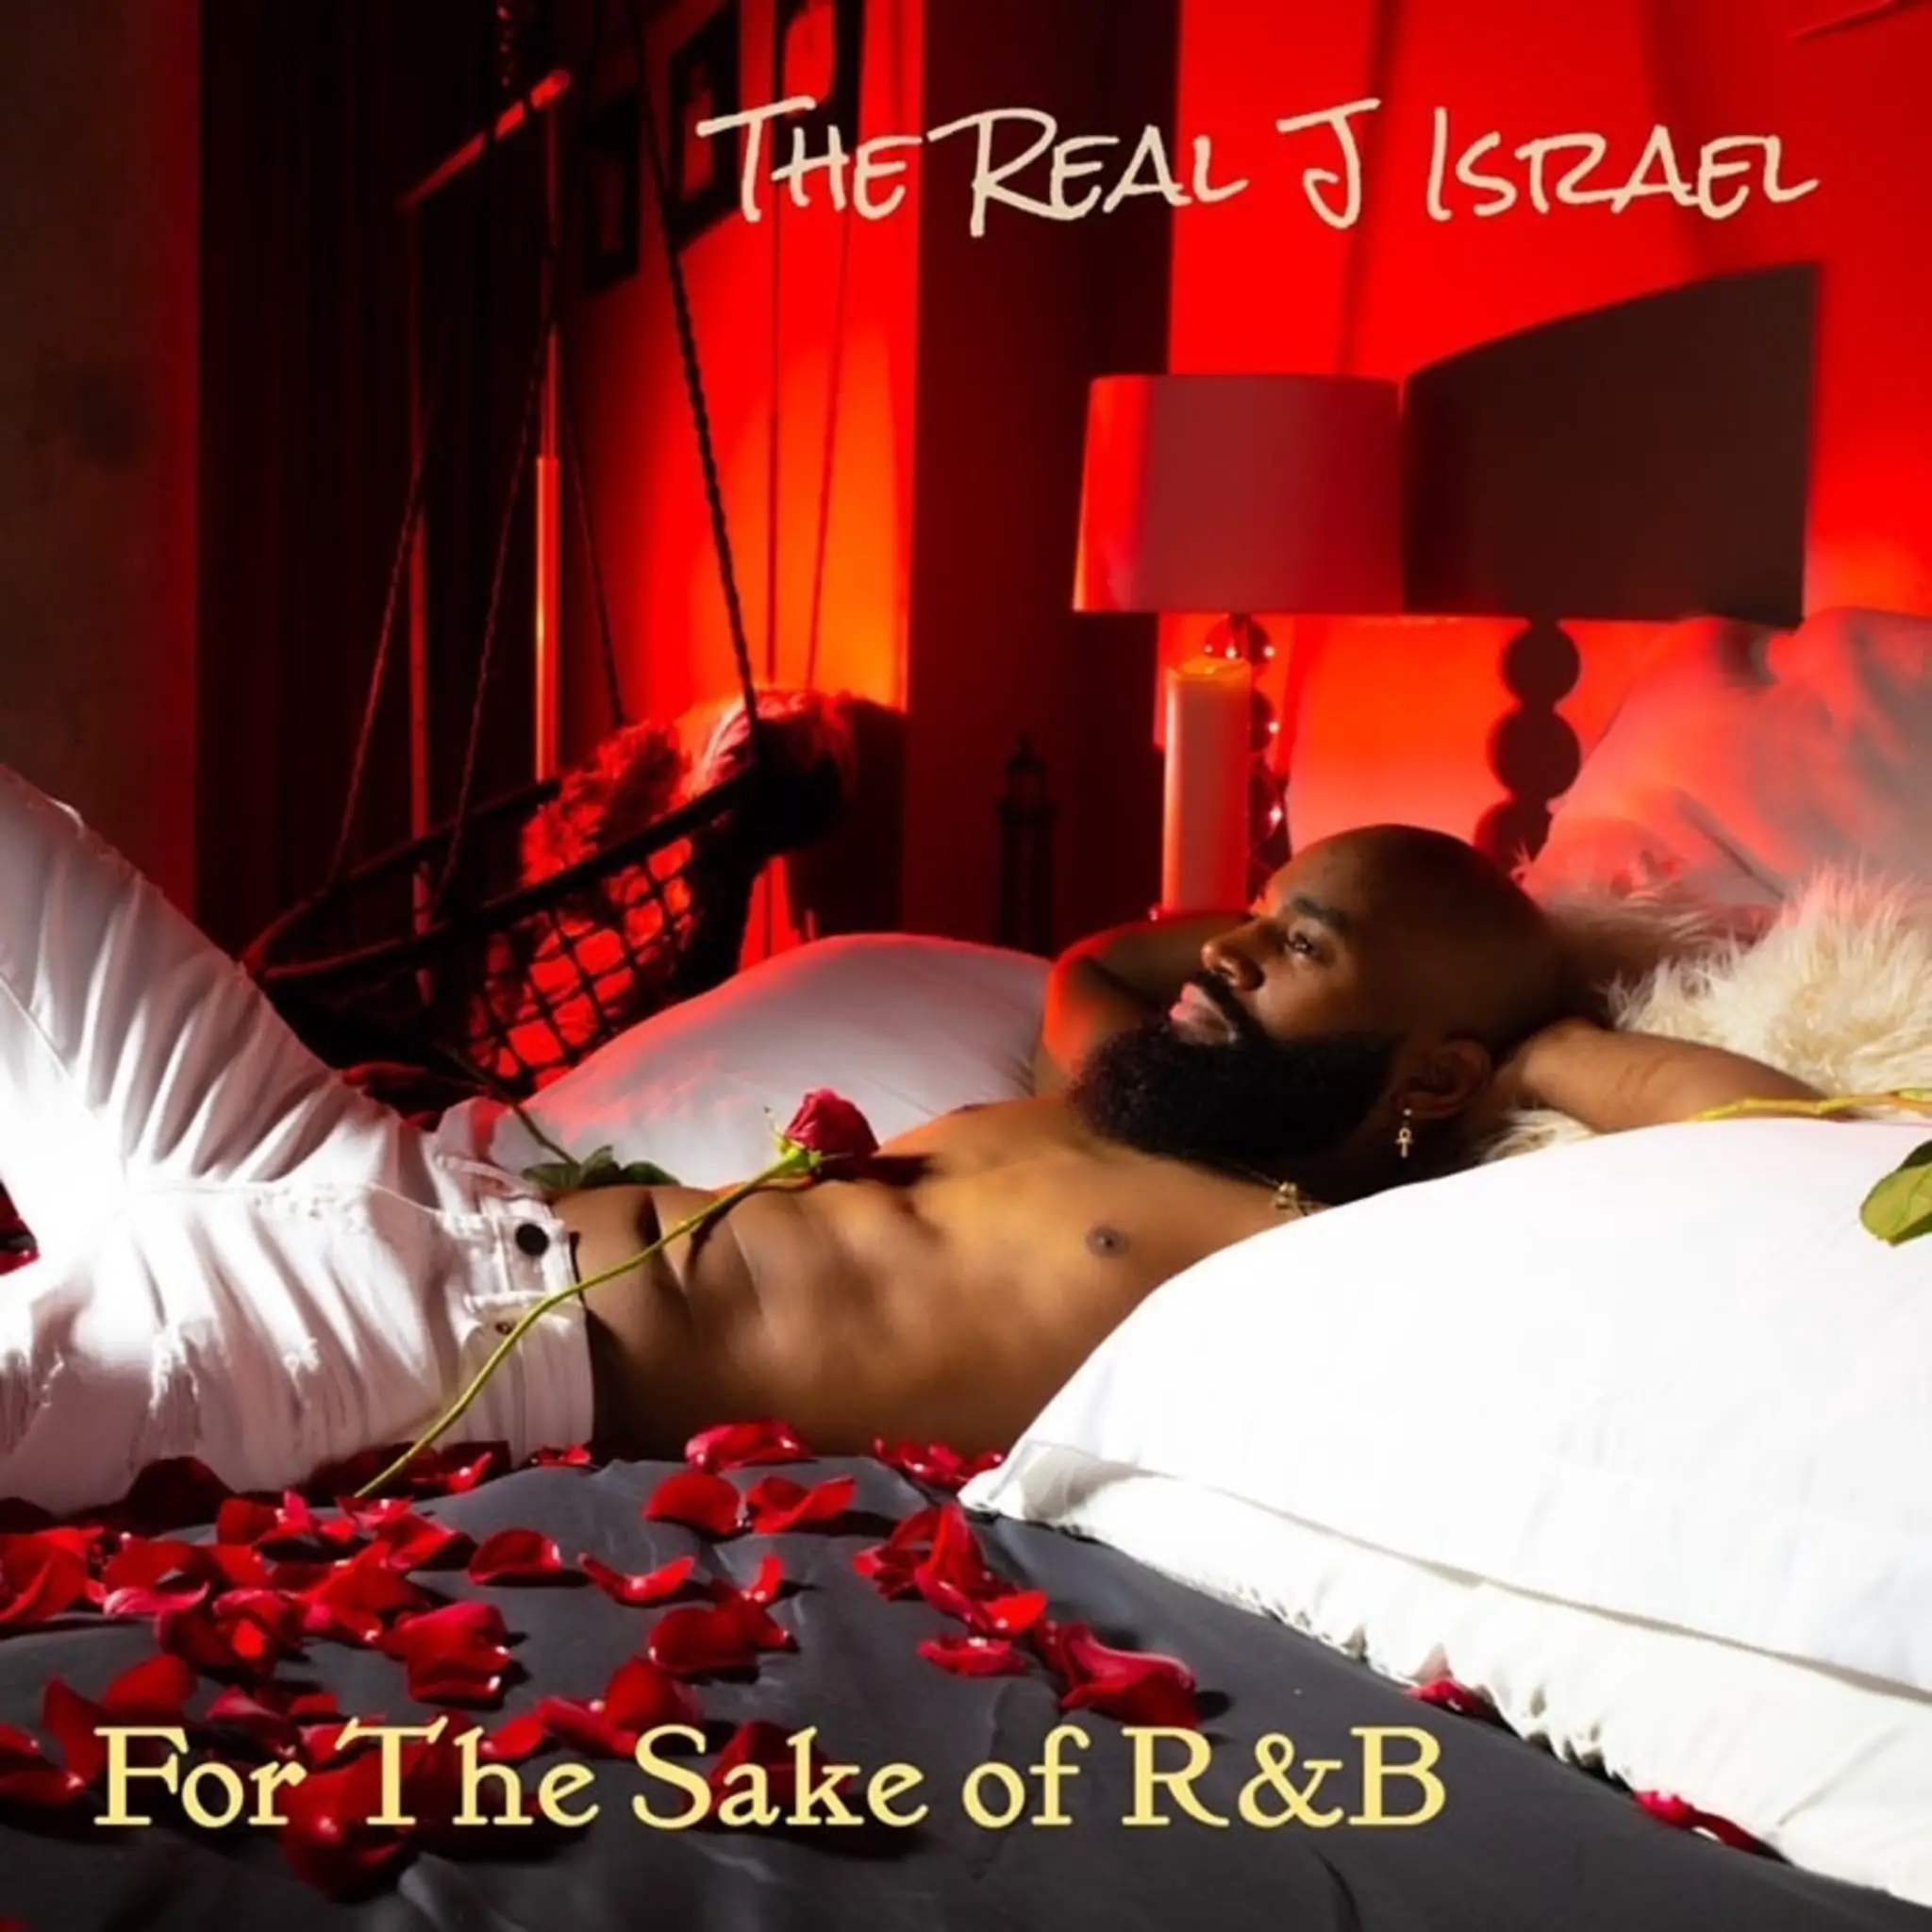 Real J Israel - 'For The Sake of R&B' Review | Opinions | LIVING LIFE FEARLESS